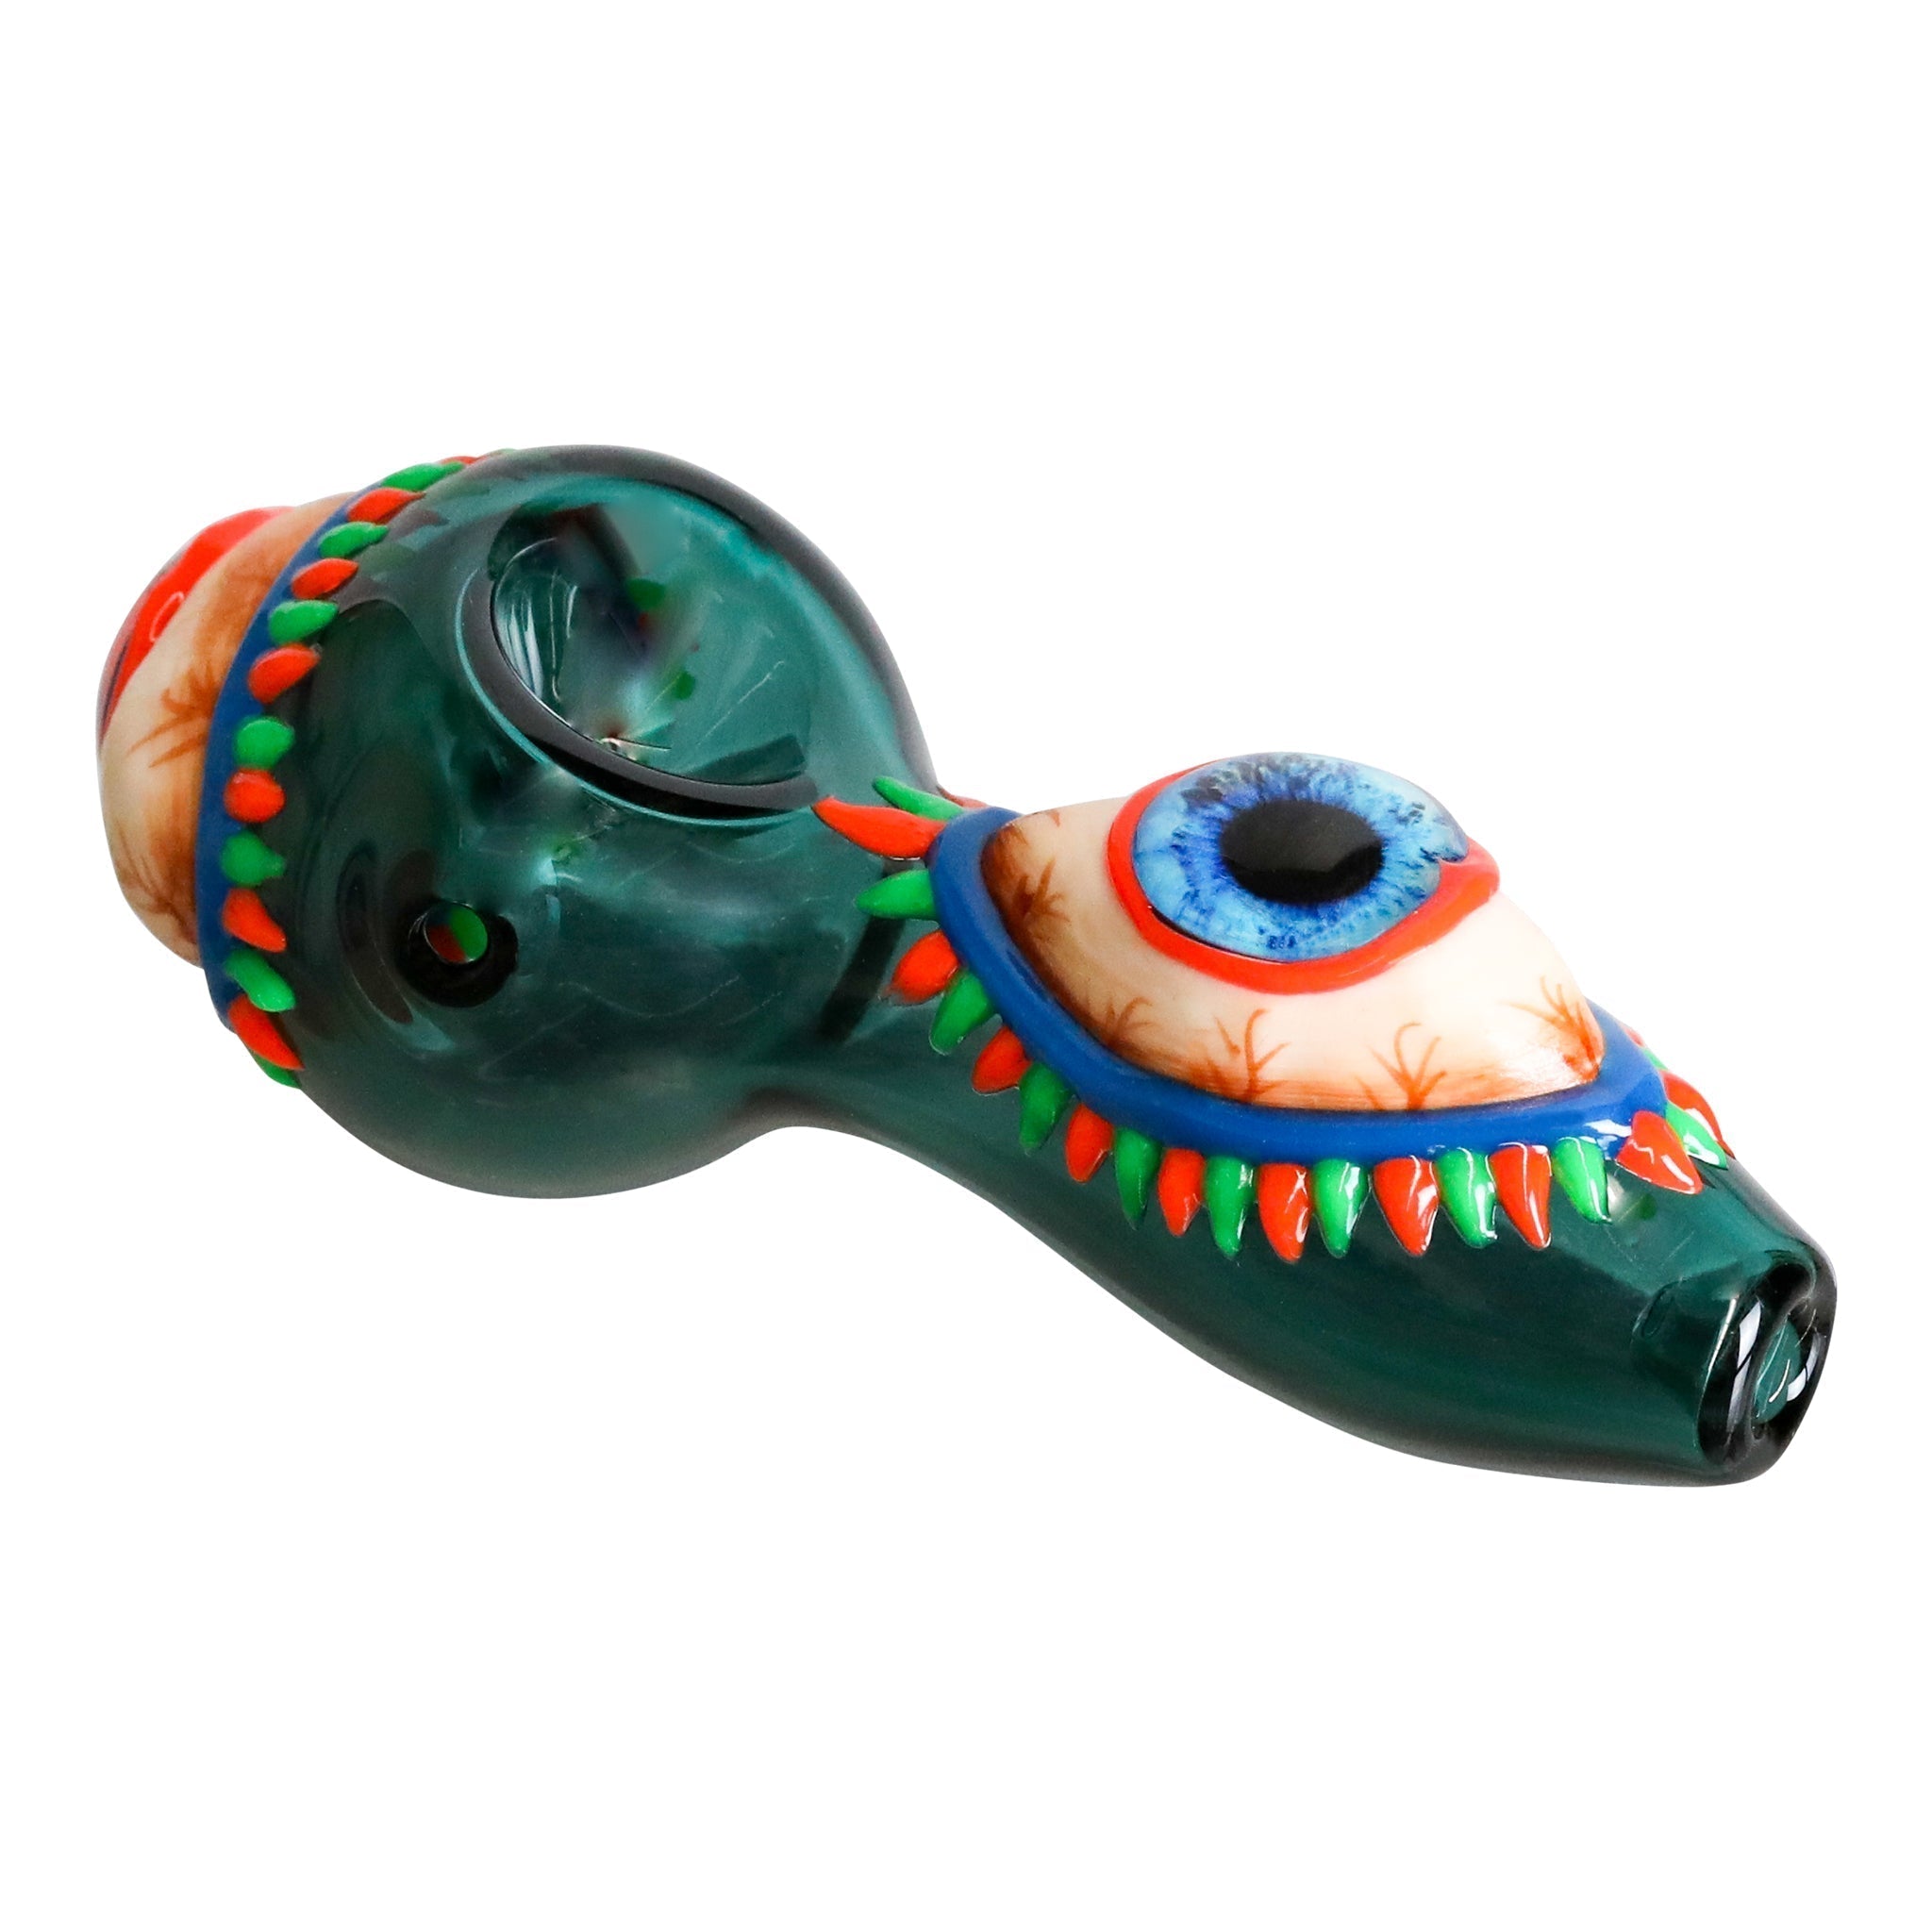 The Glowing All Seeing Eye Pipe (4.5") Pipe HF Glass Teal 